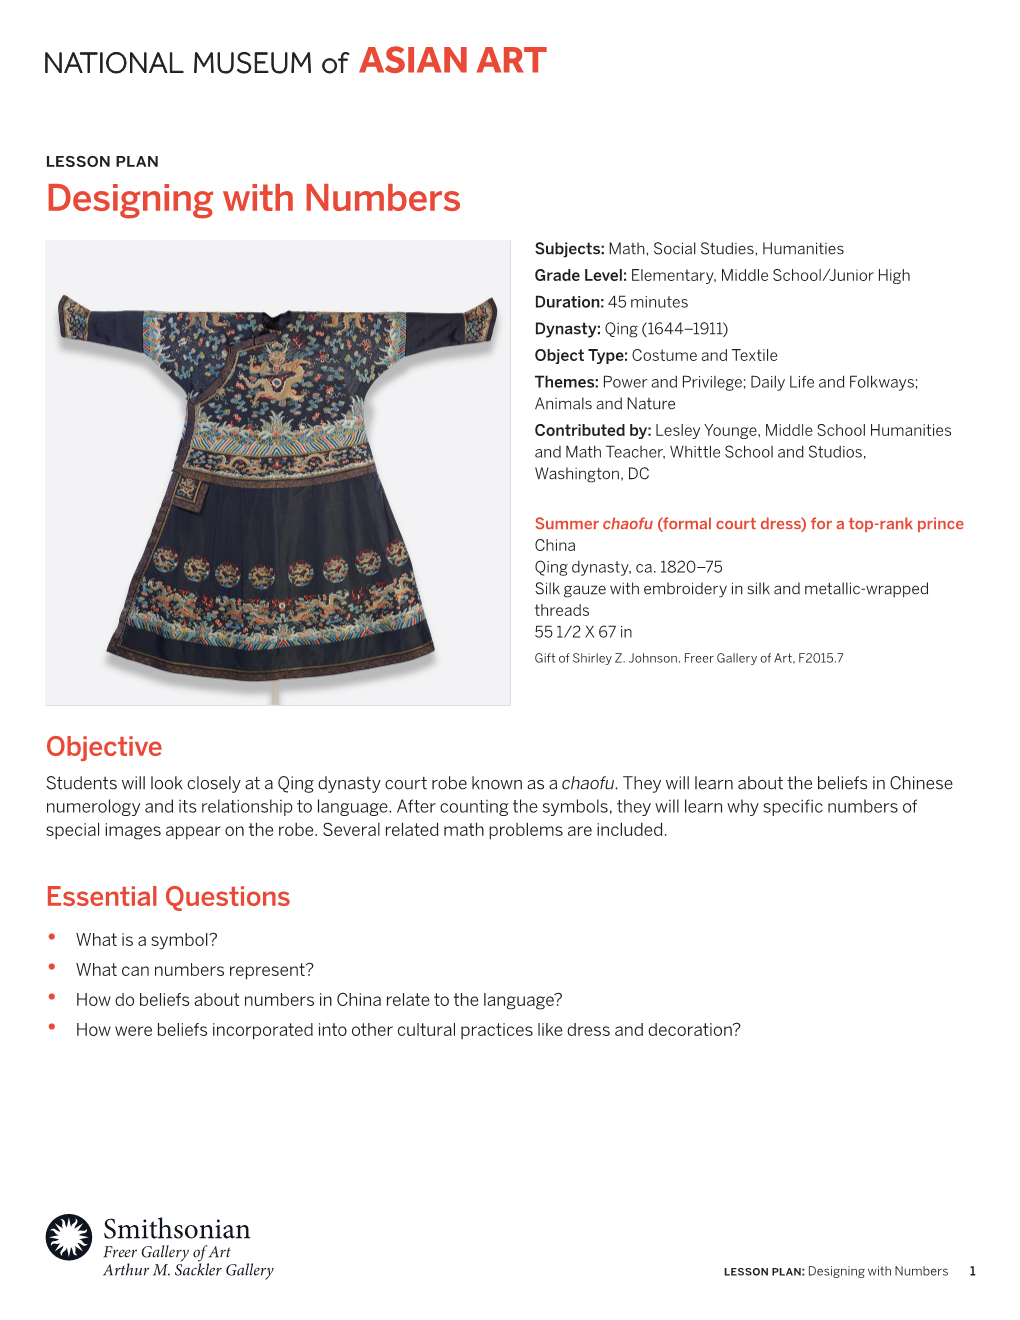 Designing with Numbers